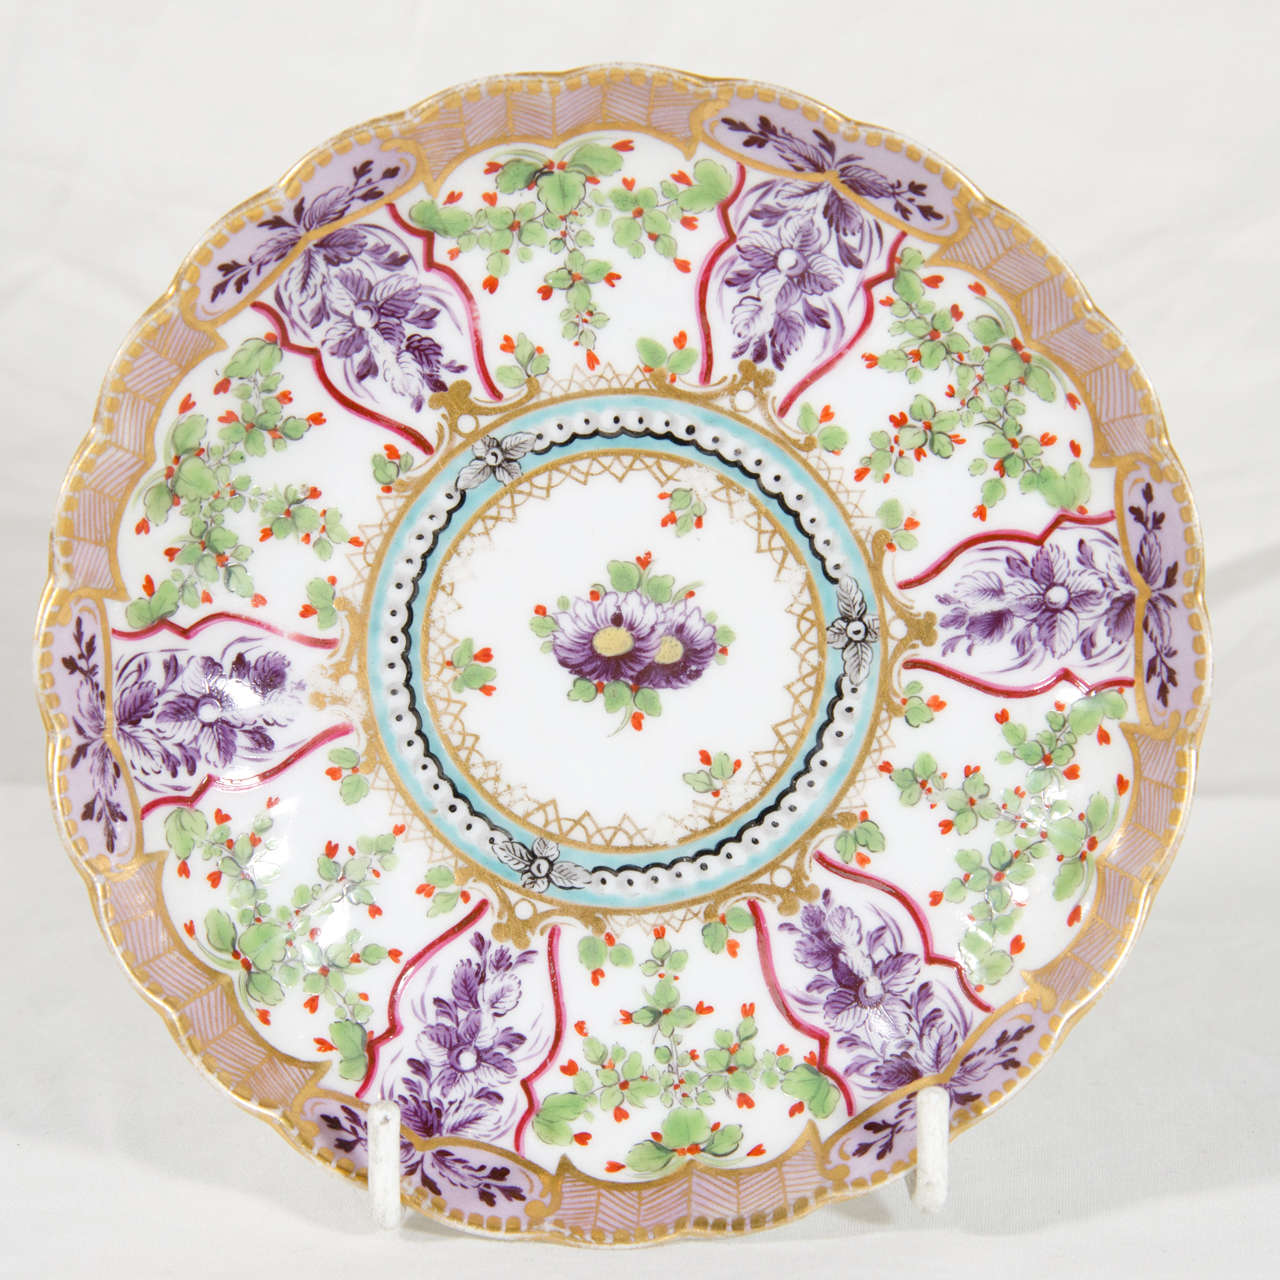 A very fine Flight and Barr Worcester tea cup and saucer of fluted form, from the lilac version of the Holly Berry Service in the Sevres style. Painted with a flower spray in the center surrounded by a turquoise circlet of faux pearls all within a